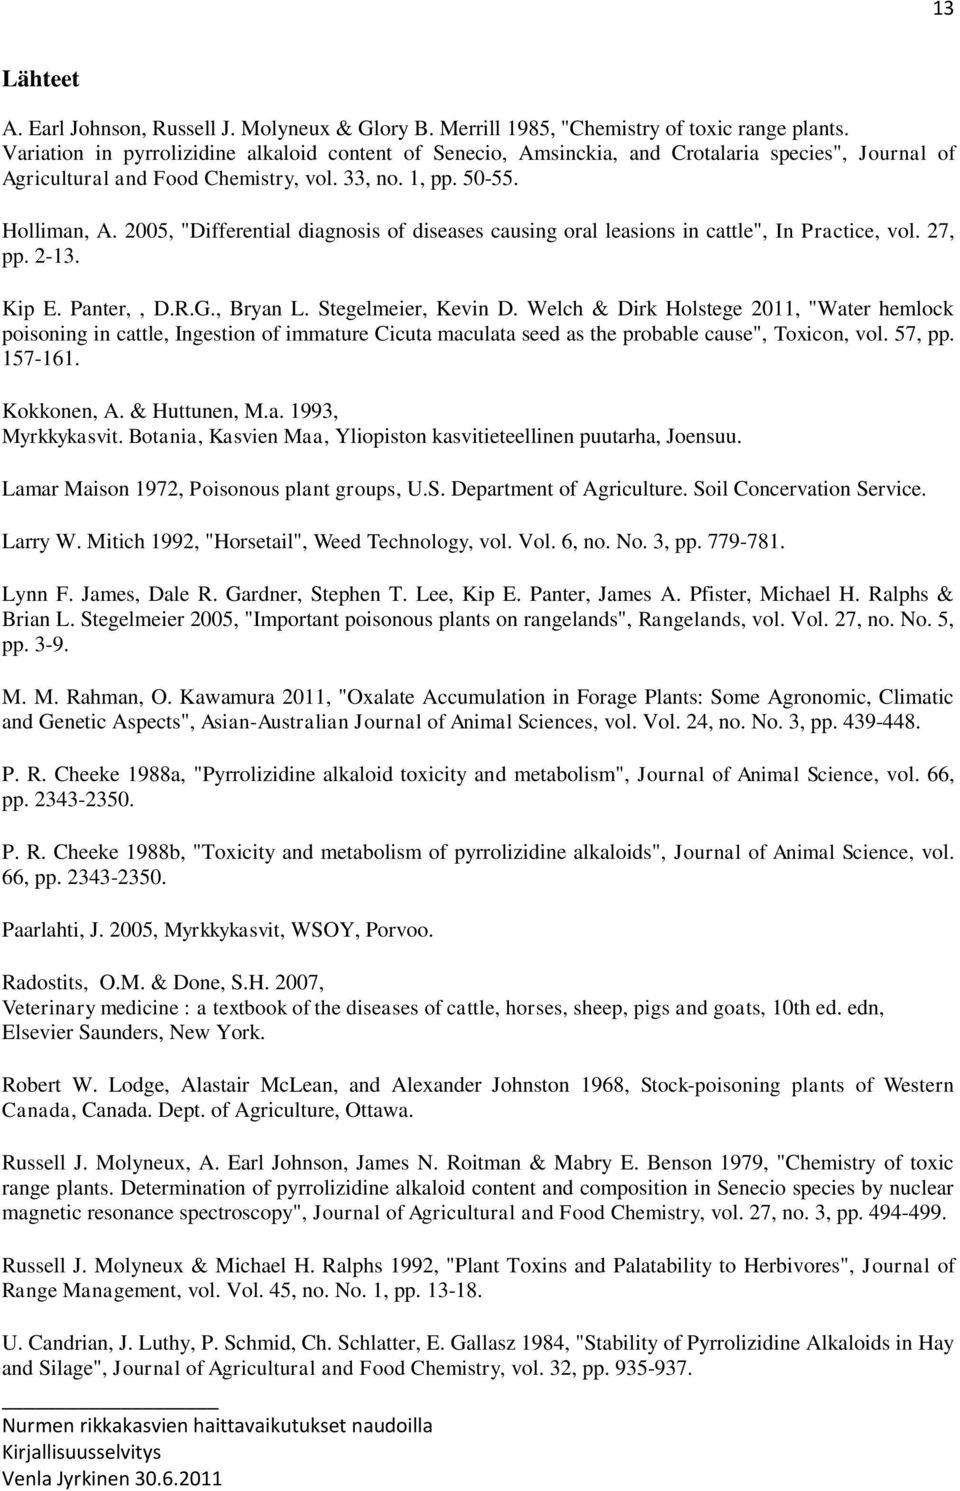 2005, "Differential diagnosis of diseases causing oral leasions in cattle", In Practice, vol. 27, pp. 2-13. Kip E. Panter,, D.R.G., Bryan L. Stegelmeier, Kevin D.